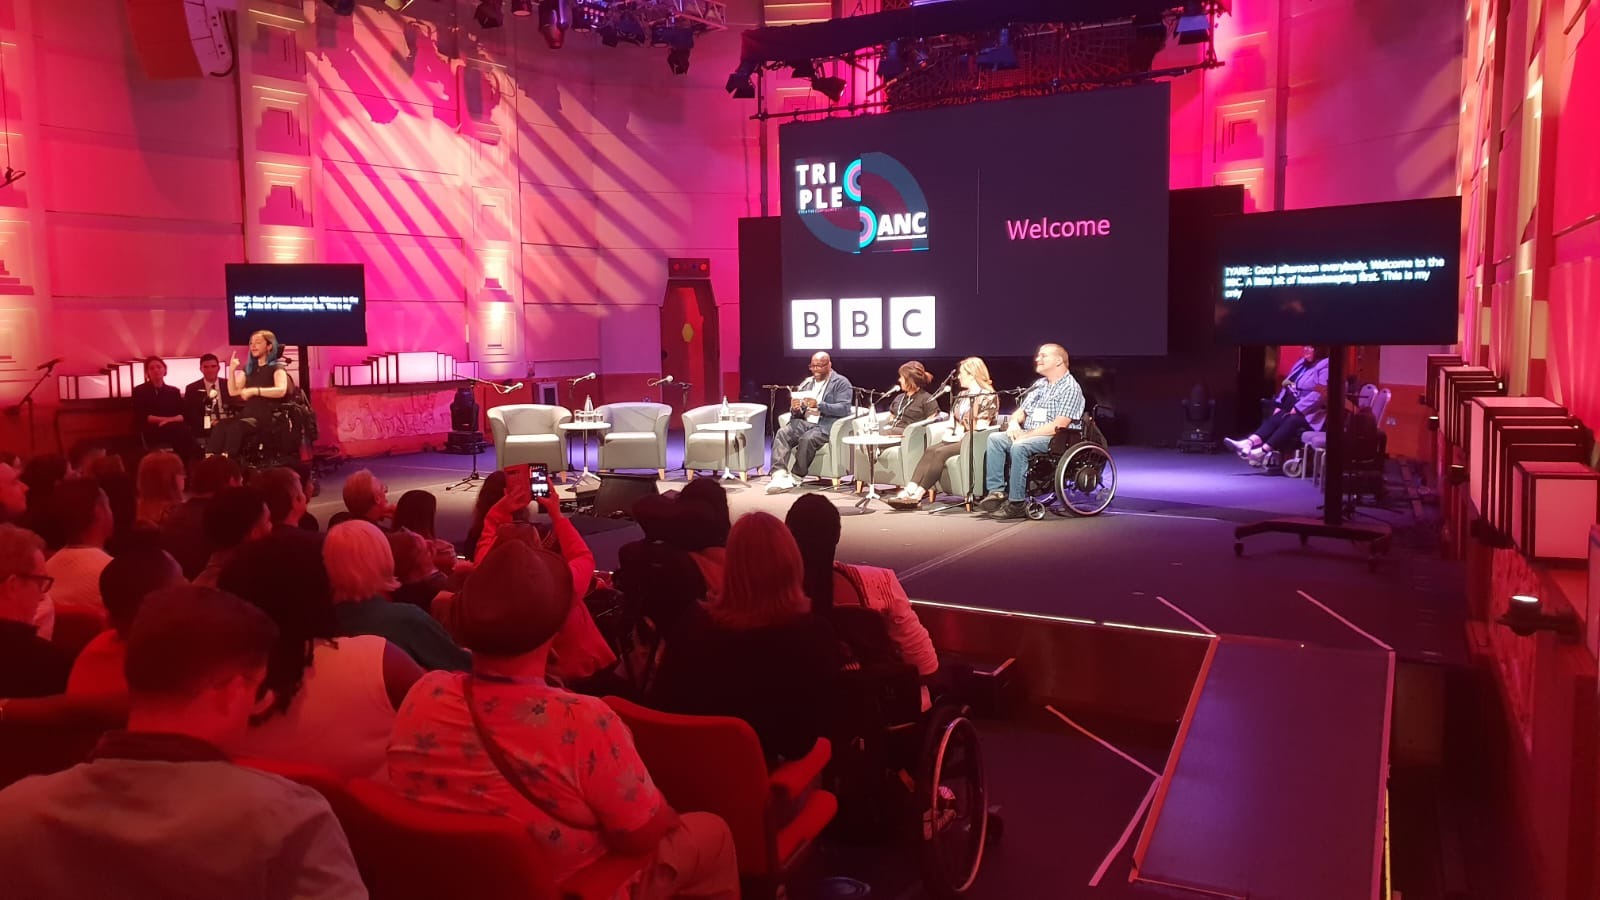 Image from previous TripleC event, which shows a large room with four people sitting at the front, with an audience facing the speakers. A large screen behind the speakers reads TripleC DANC, welcome, and has the BBC logo.